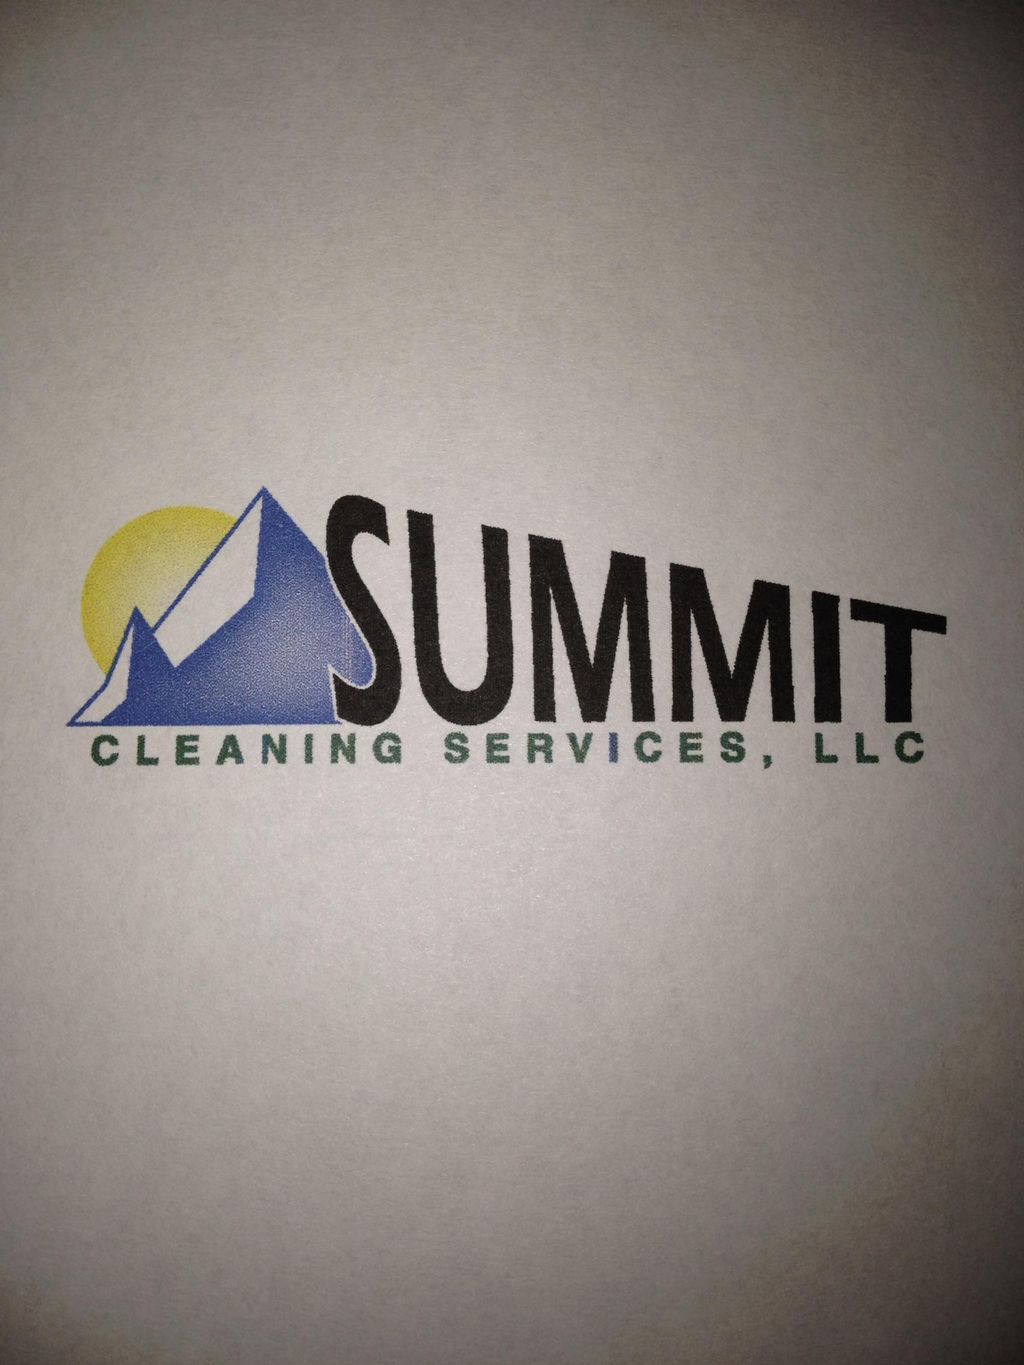 Summit Cleaning Services, LLC